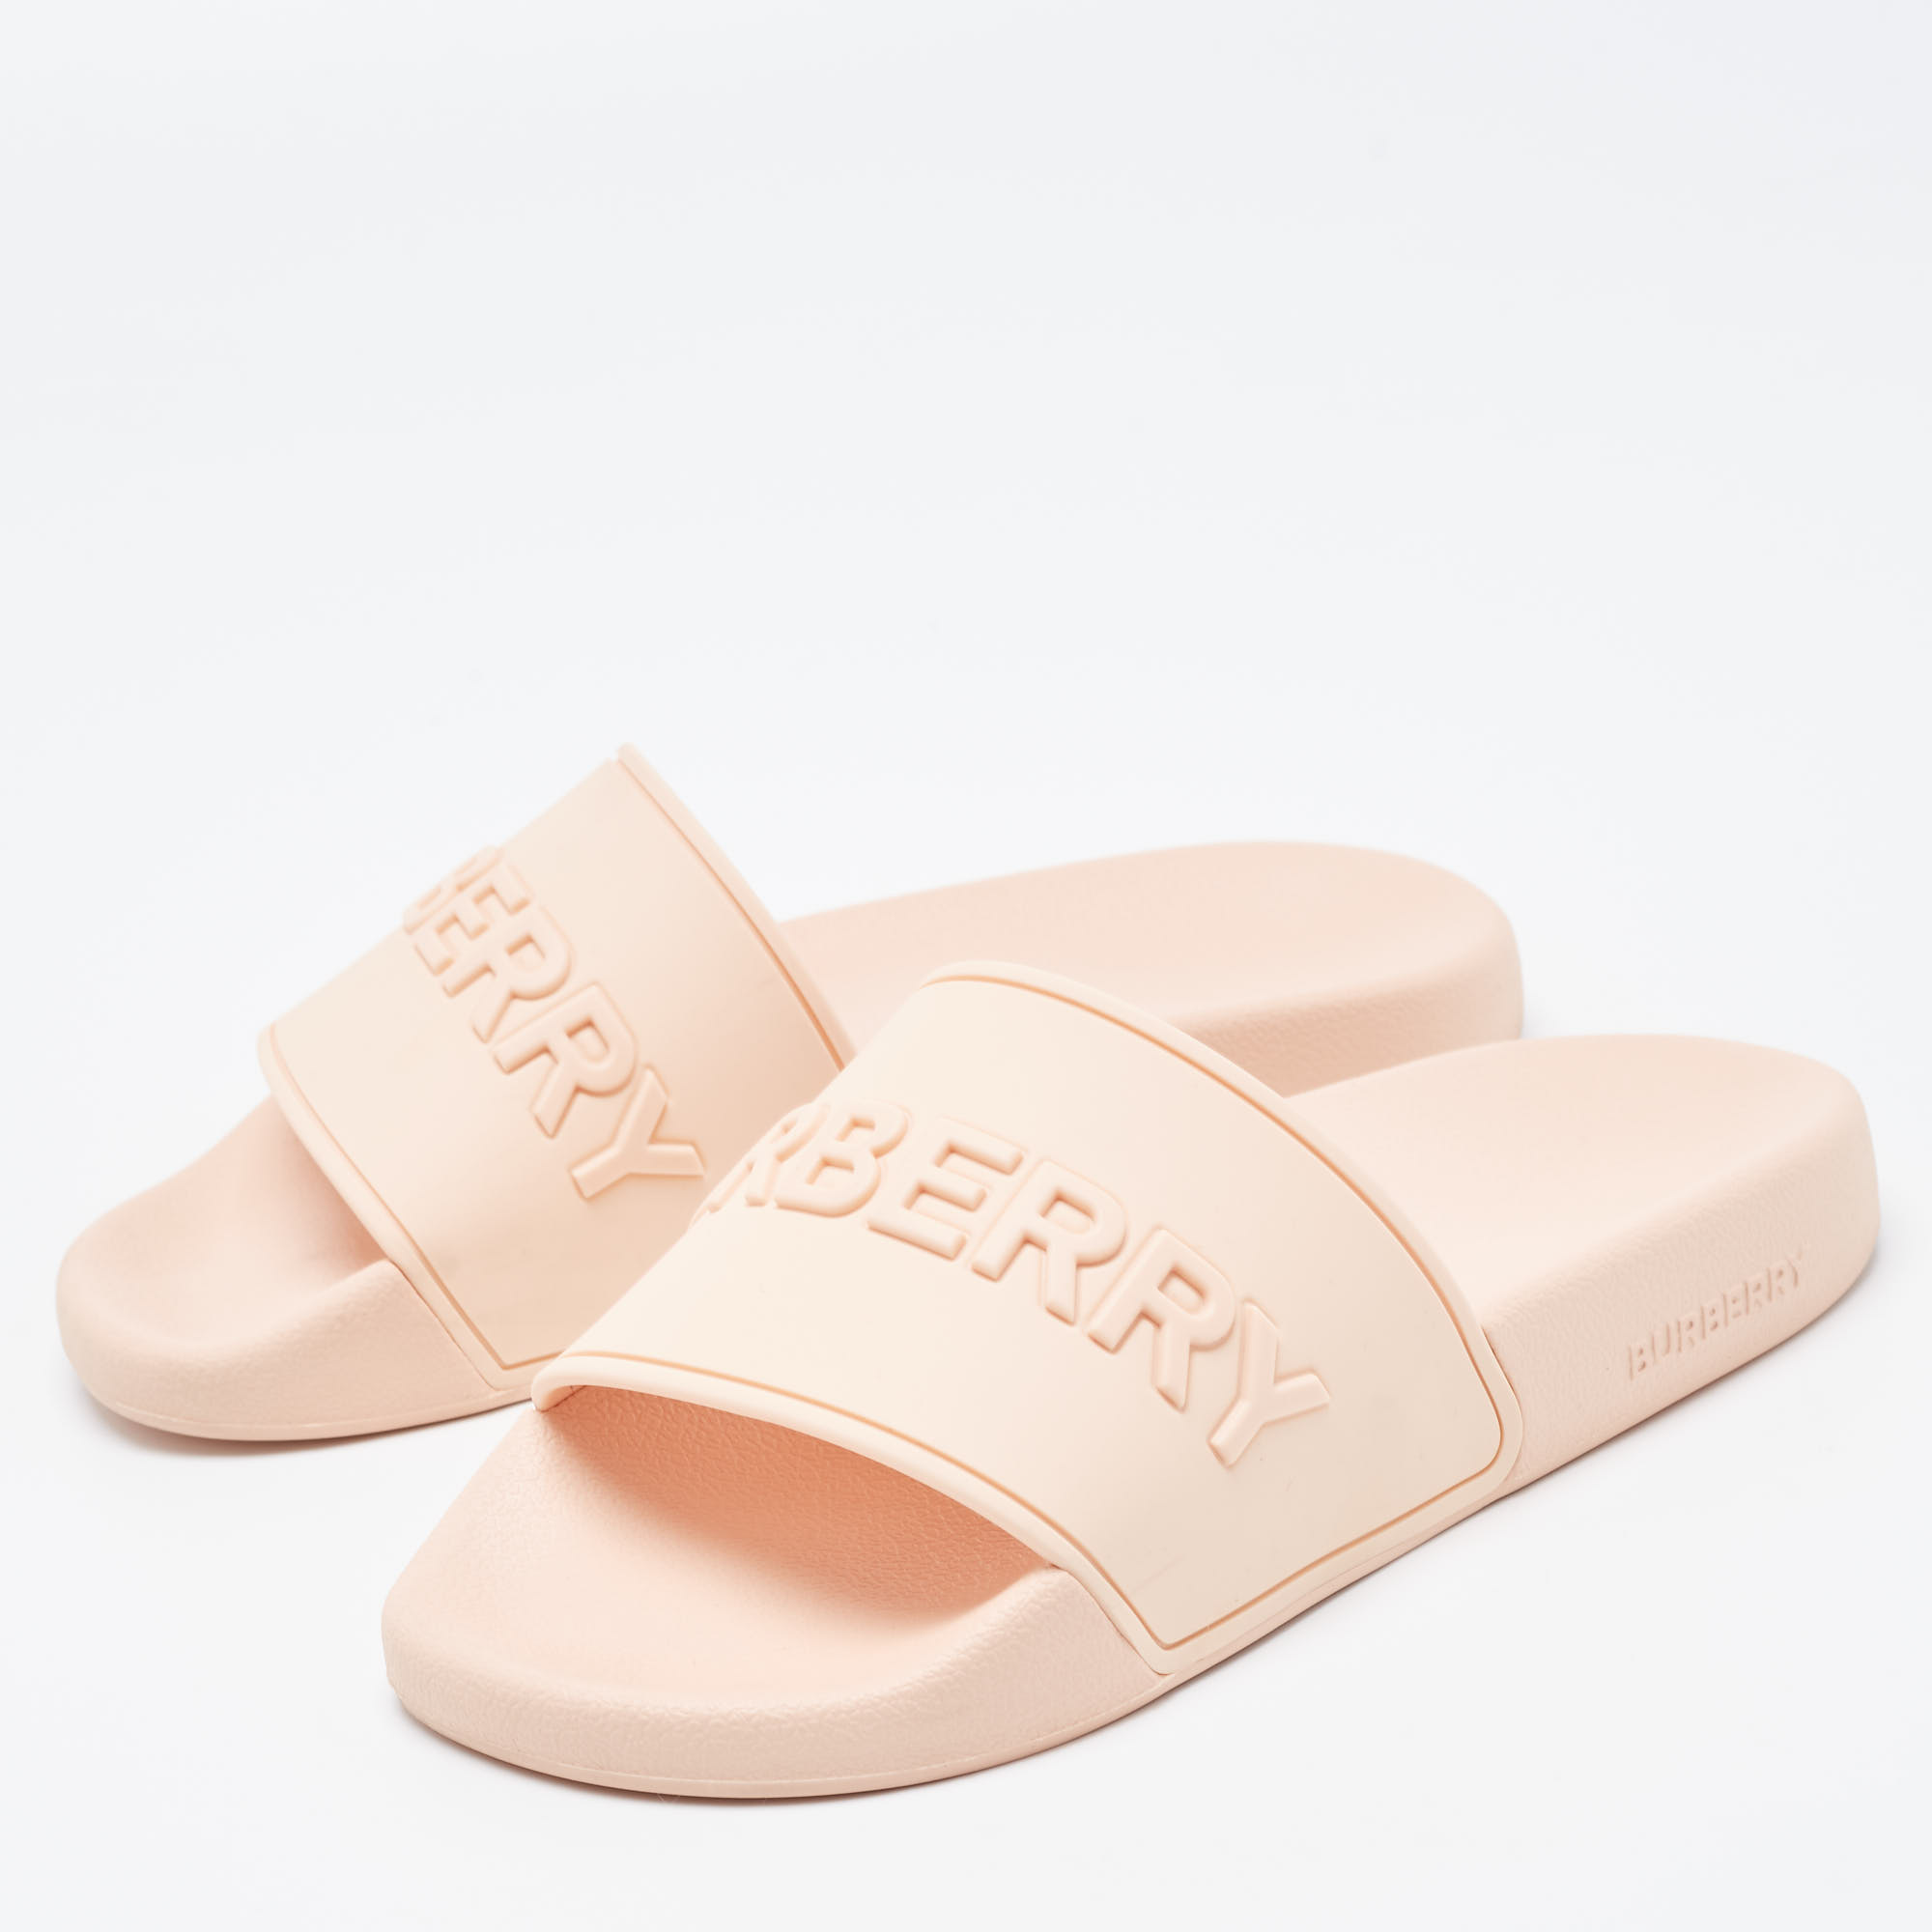 

Burberry Peach Pink Rubber Logo Embossed Flat Slides Size